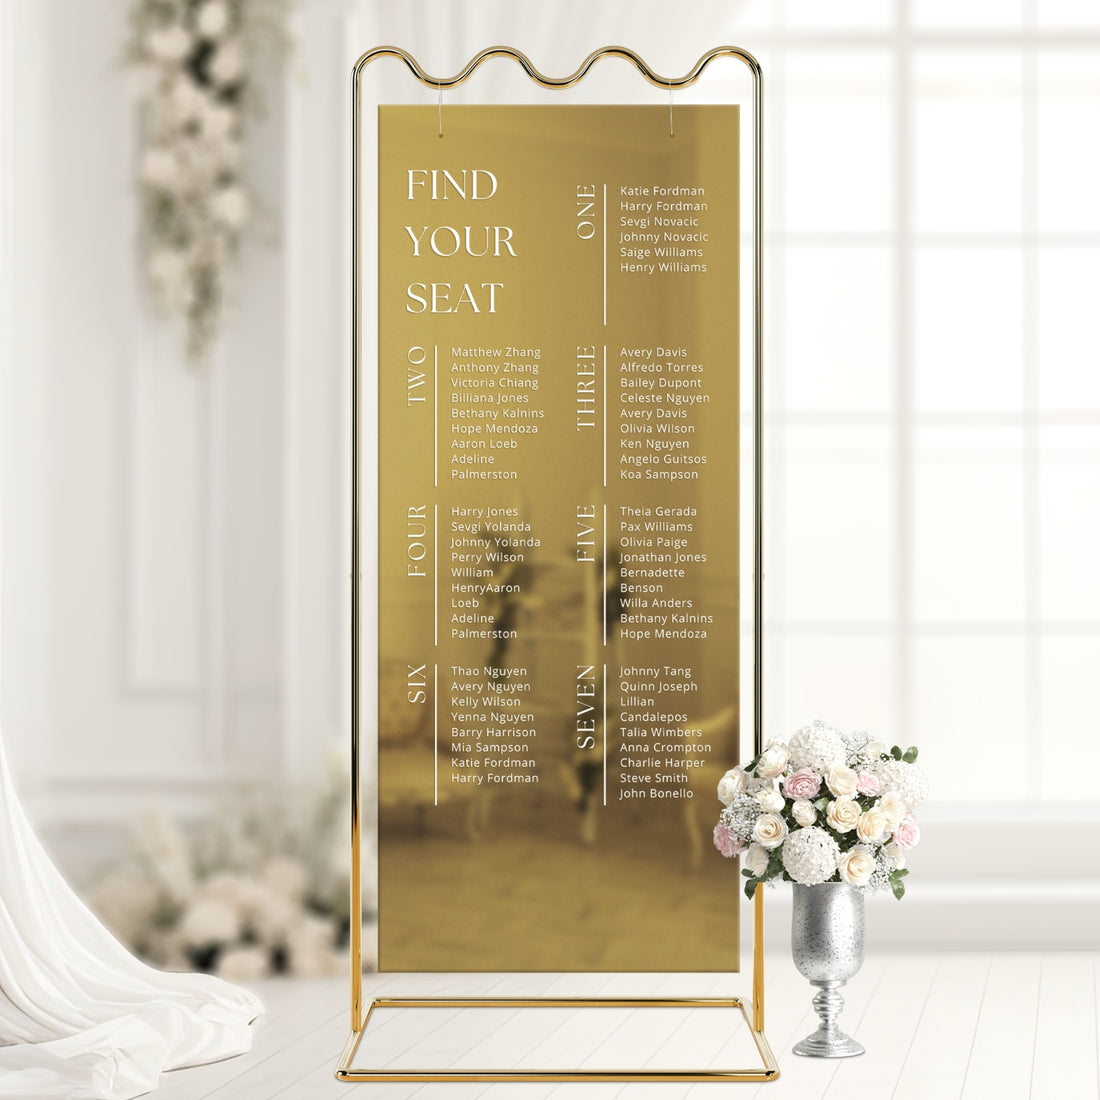 Personalised Wedding Seating Chart Sign, Custom UV Print Reception Guest Plan, Find Your Seat Mirror Signage, Engagement/ Anniversary Decor